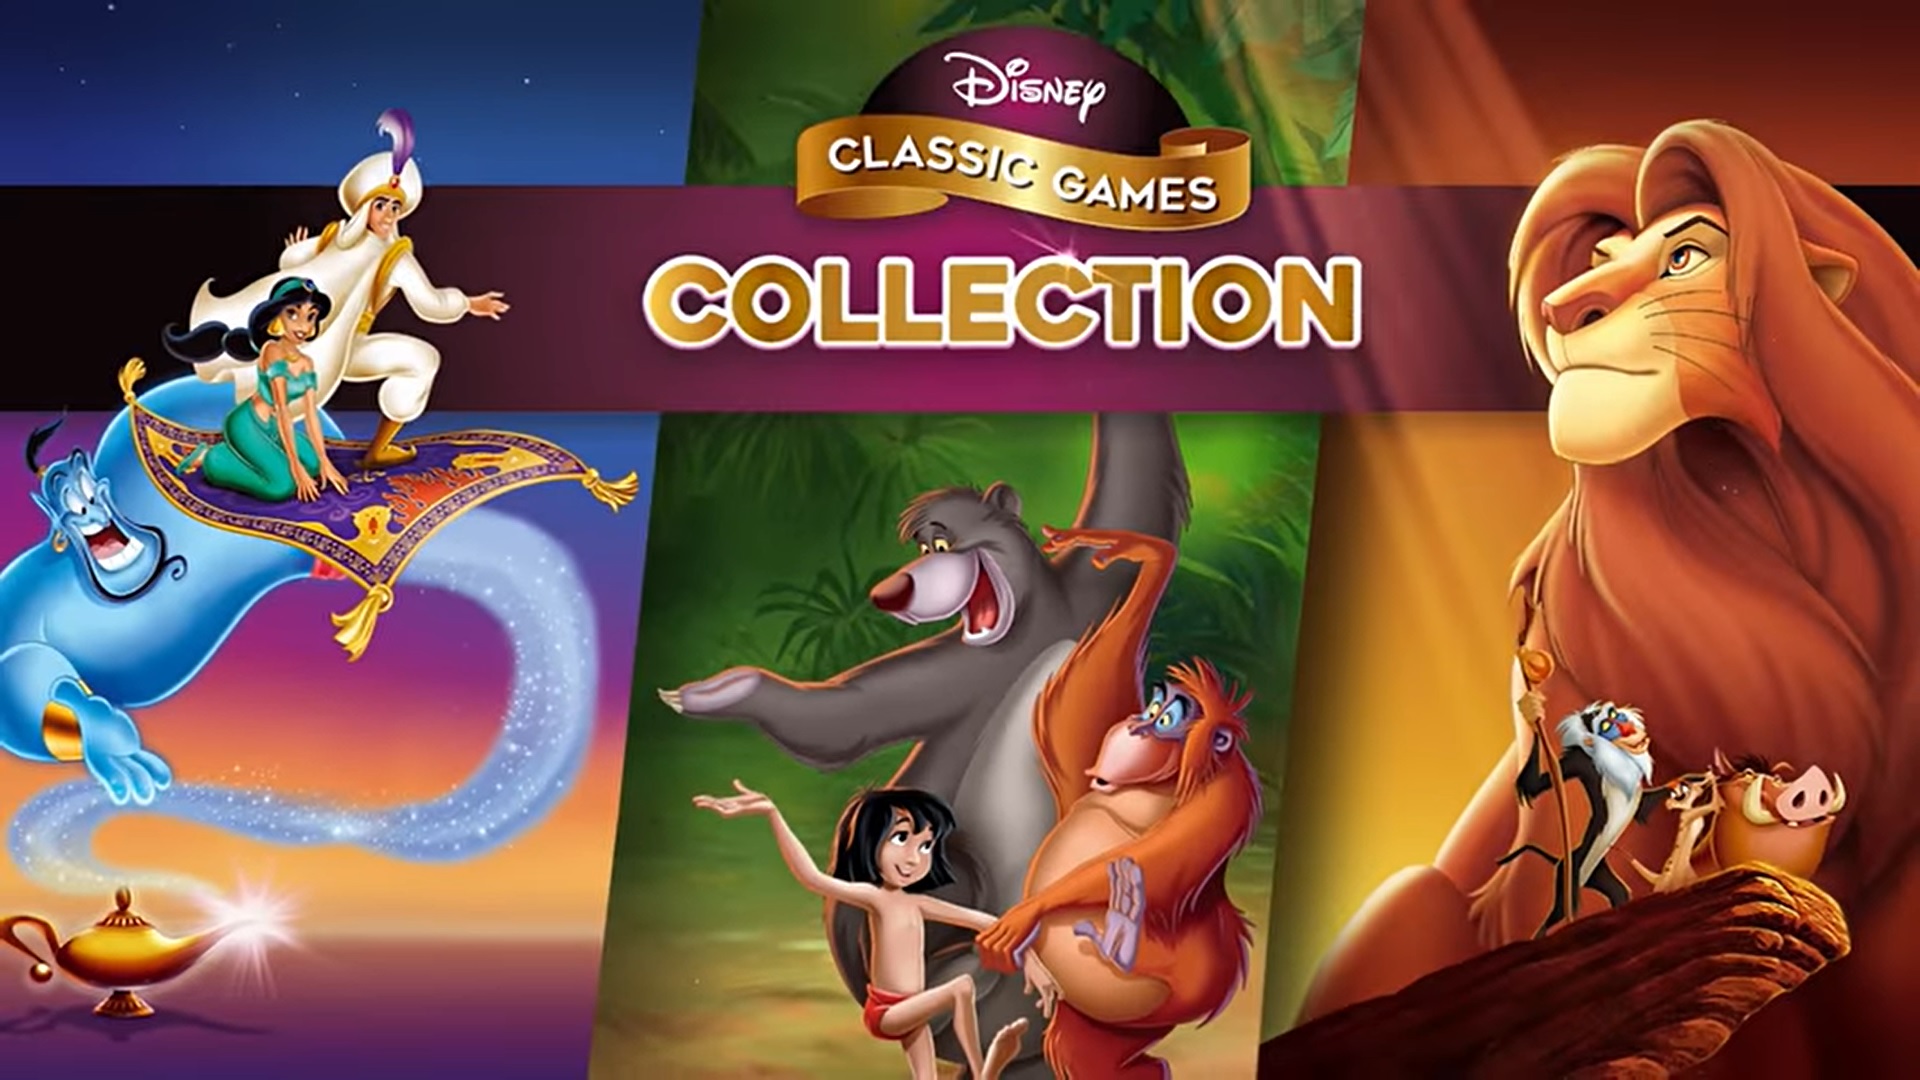 Disney Classic Game Collection adds The Jungle Book to Aladdin and Lion | GamesRadar+